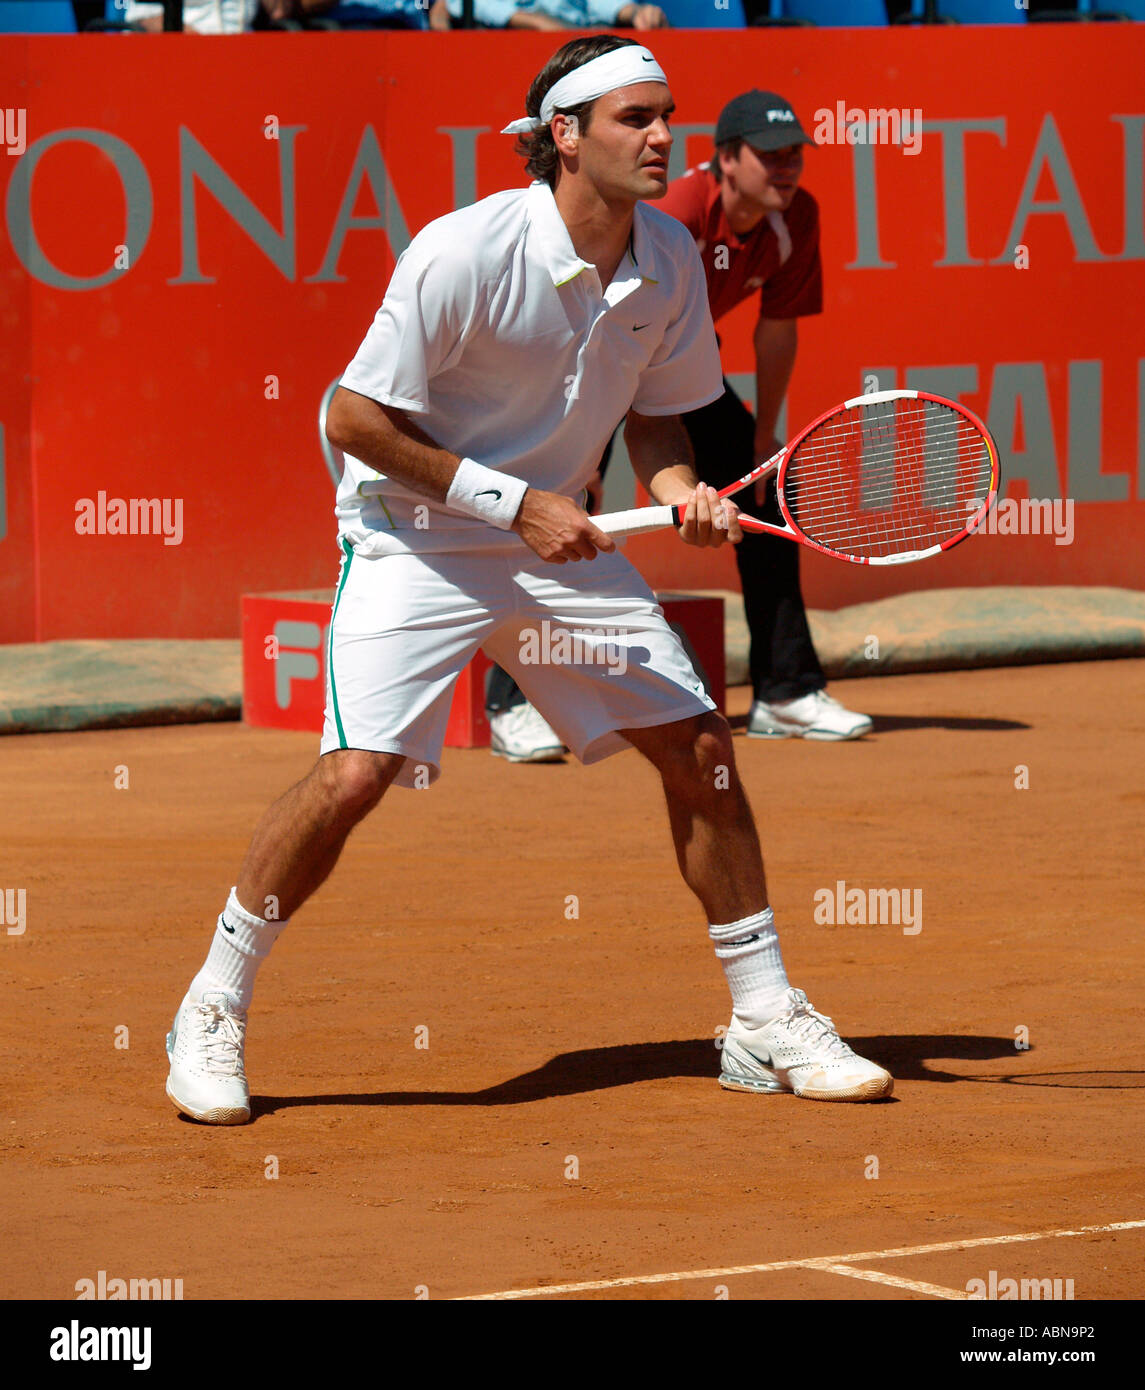 roger-federer-ready-to-receive-serve-from-david-nalbandian-in-semi-ABN9P2.jpg